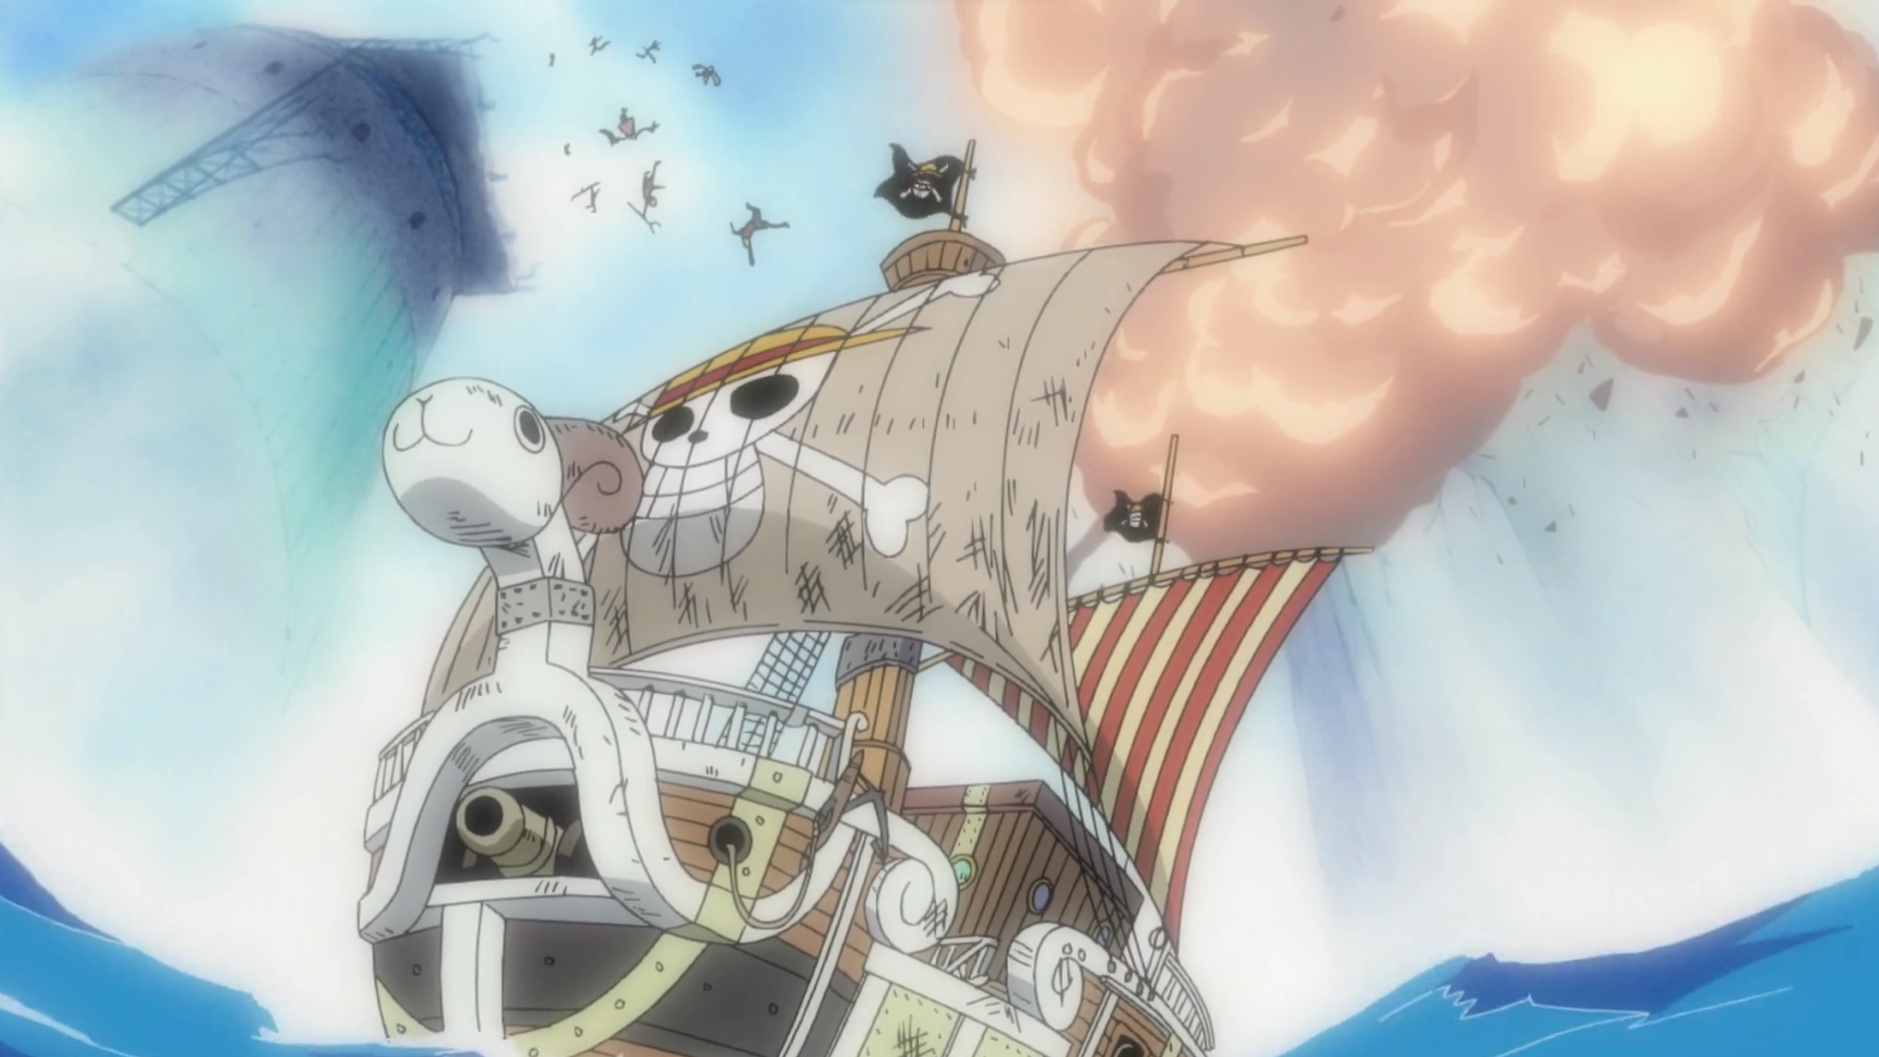 One Piece Enies Lobby Arc Going Merry Arrives To Save Crew